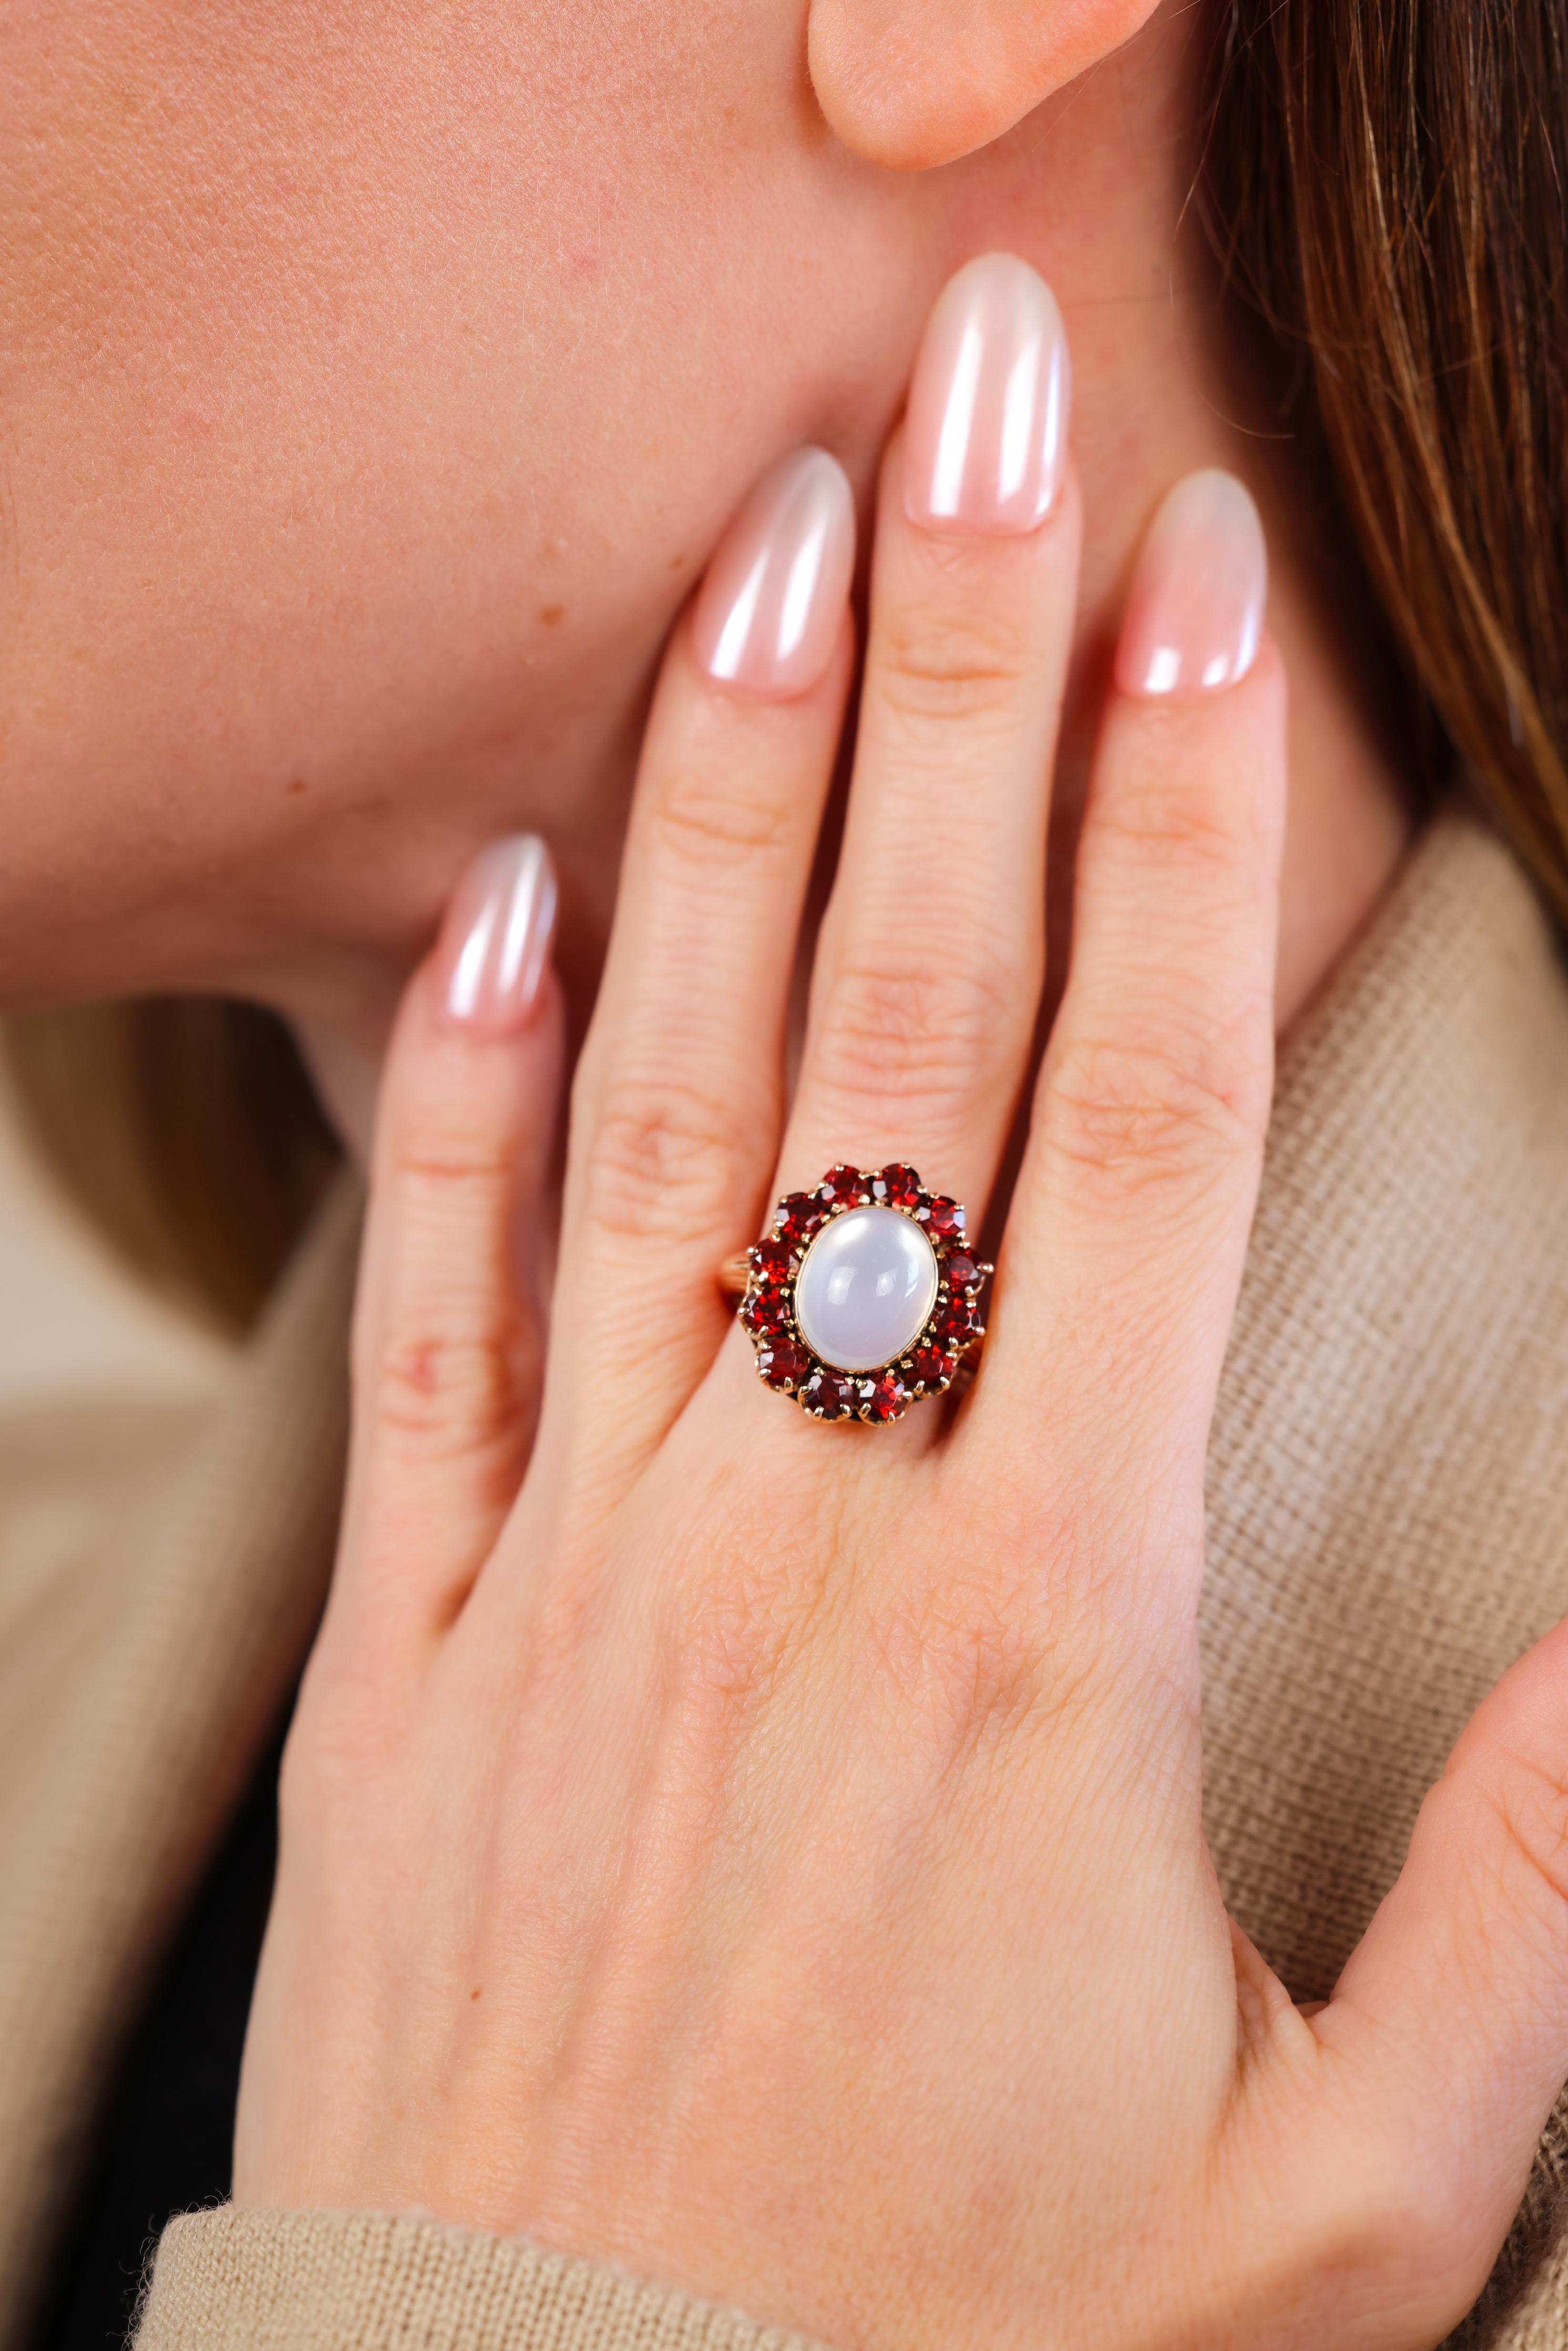 5.2 carat cabochon cut moonstone
12 fiery orangey-red round cut garnet weighing approx 3.5 carats
14k yellow gold 
Victorian circa 1890 
Ring size 8-1/4 and can be resized
6.7 grams

This exquisite Victorian ring from circa 1890 is a breathtaking